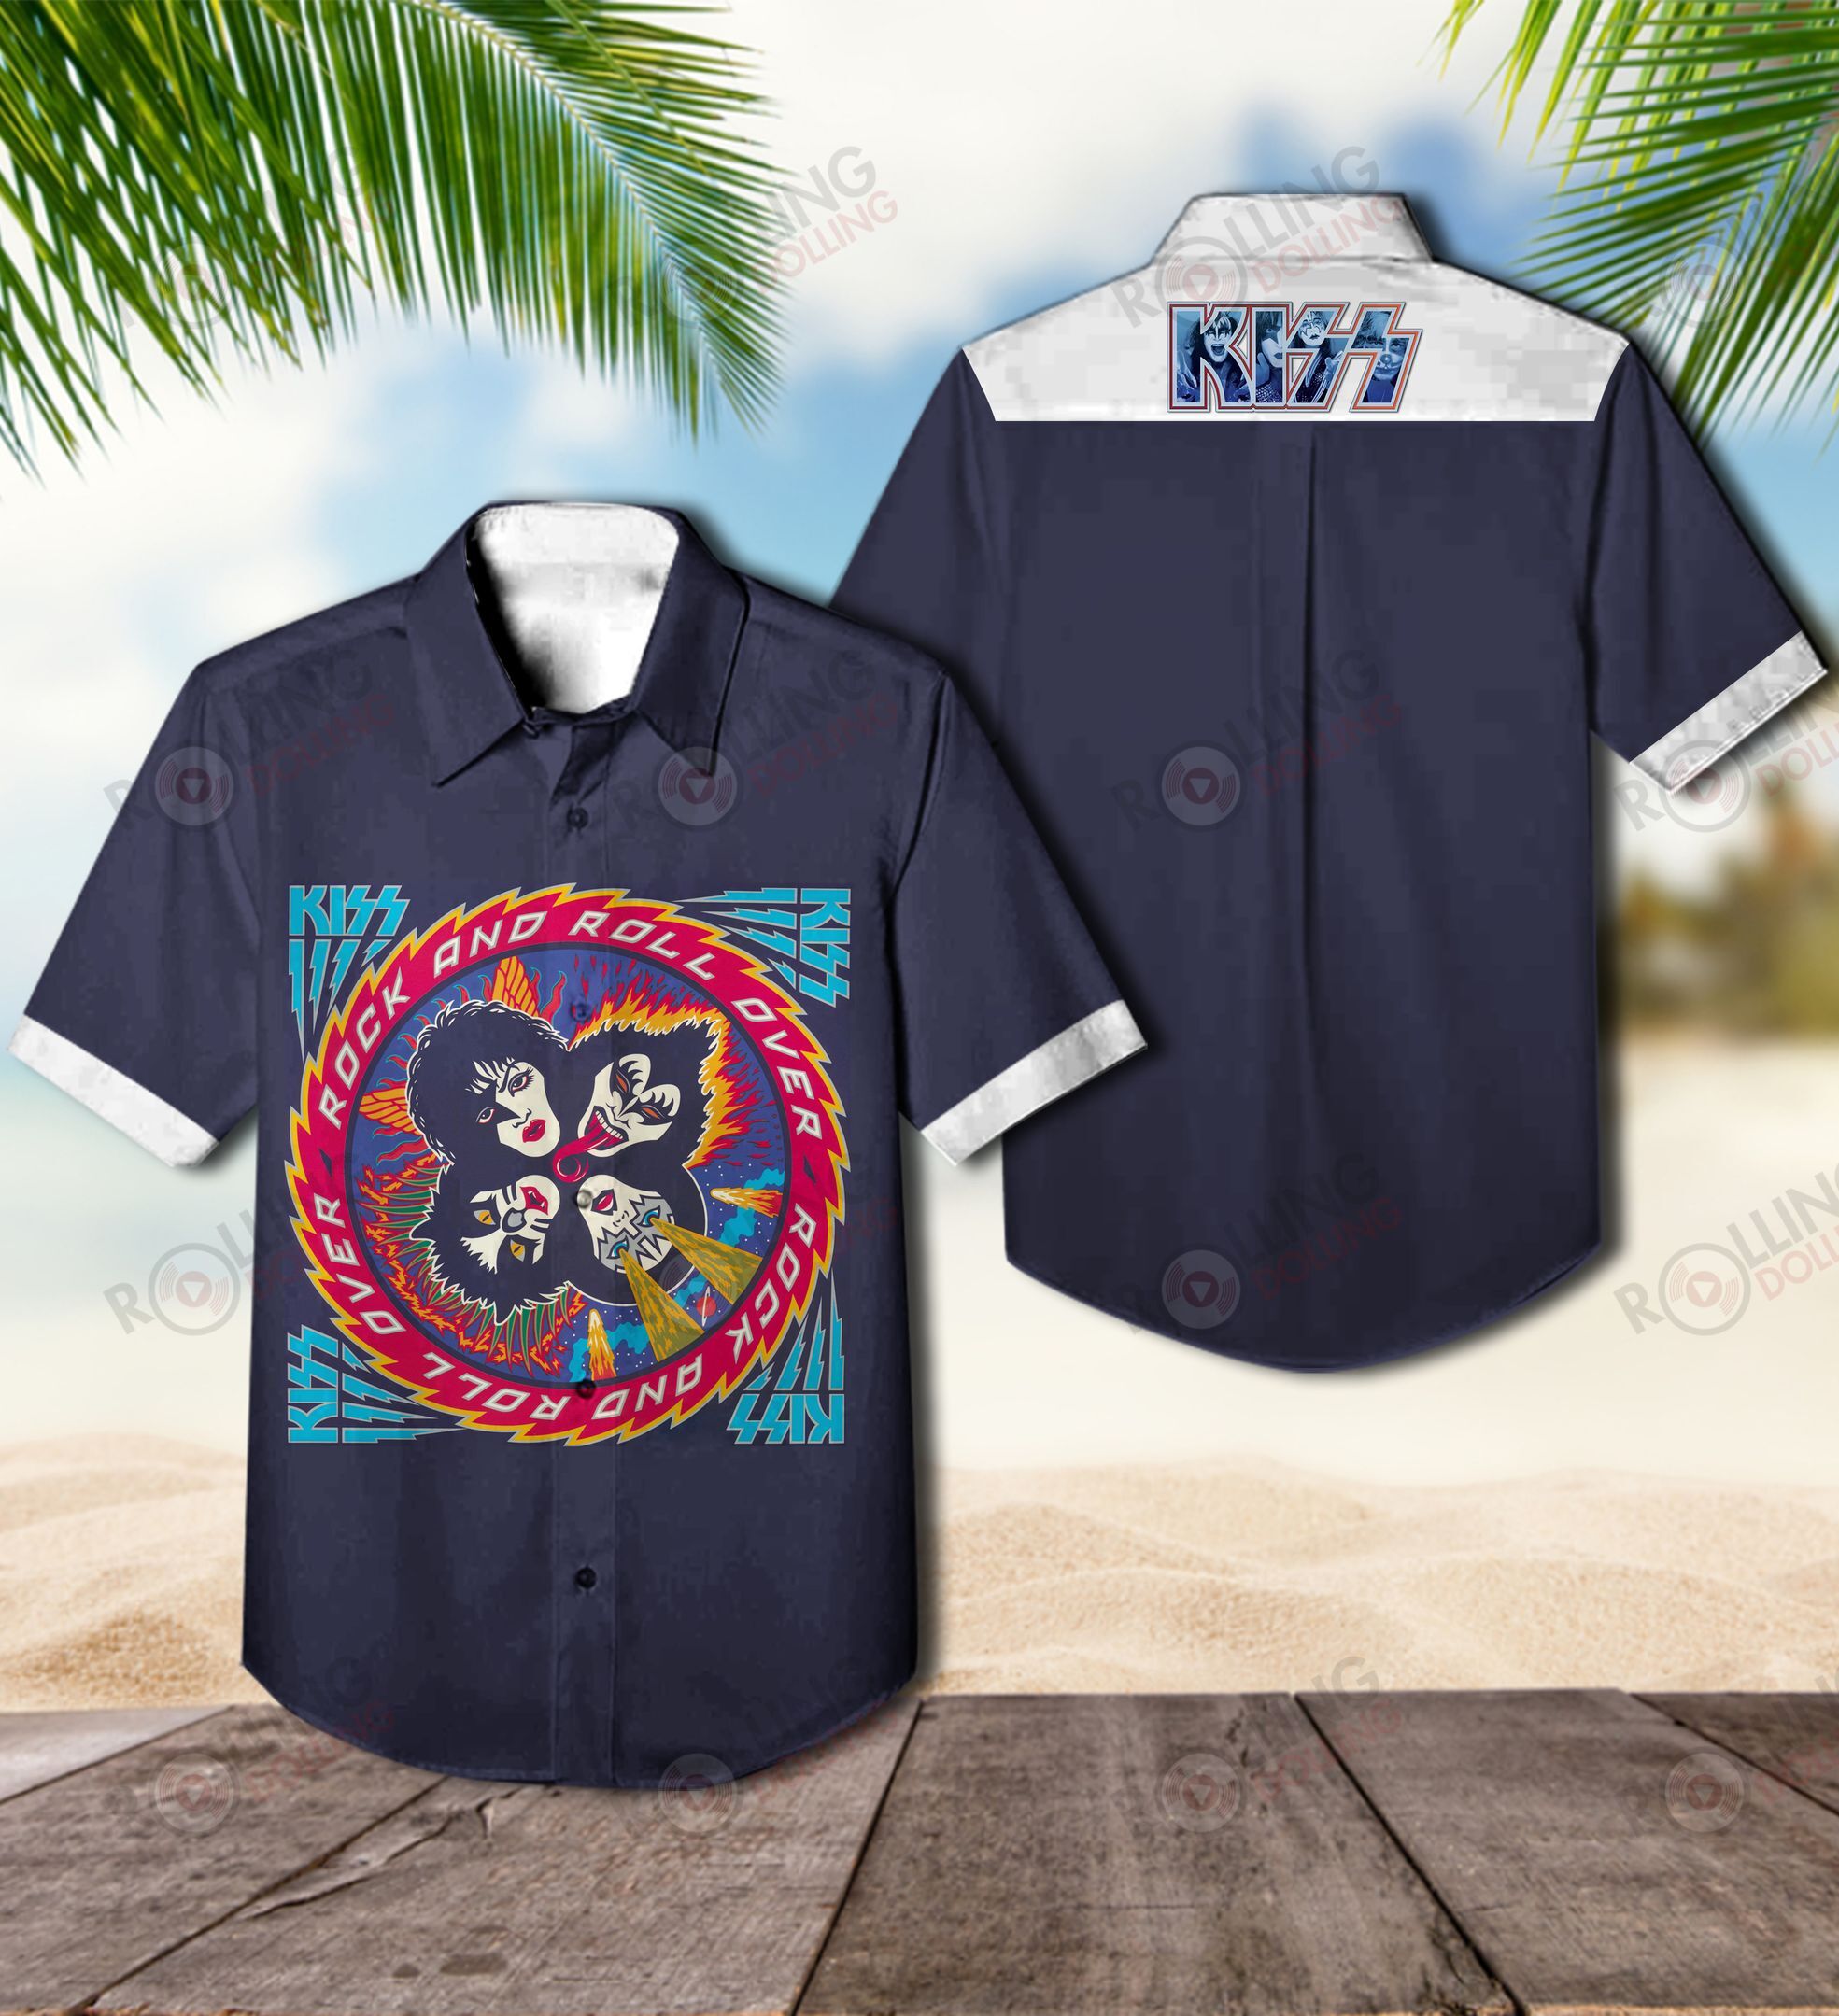 For summer, consider wearing This Amazing Hawaiian Shirt shirt in our store 35